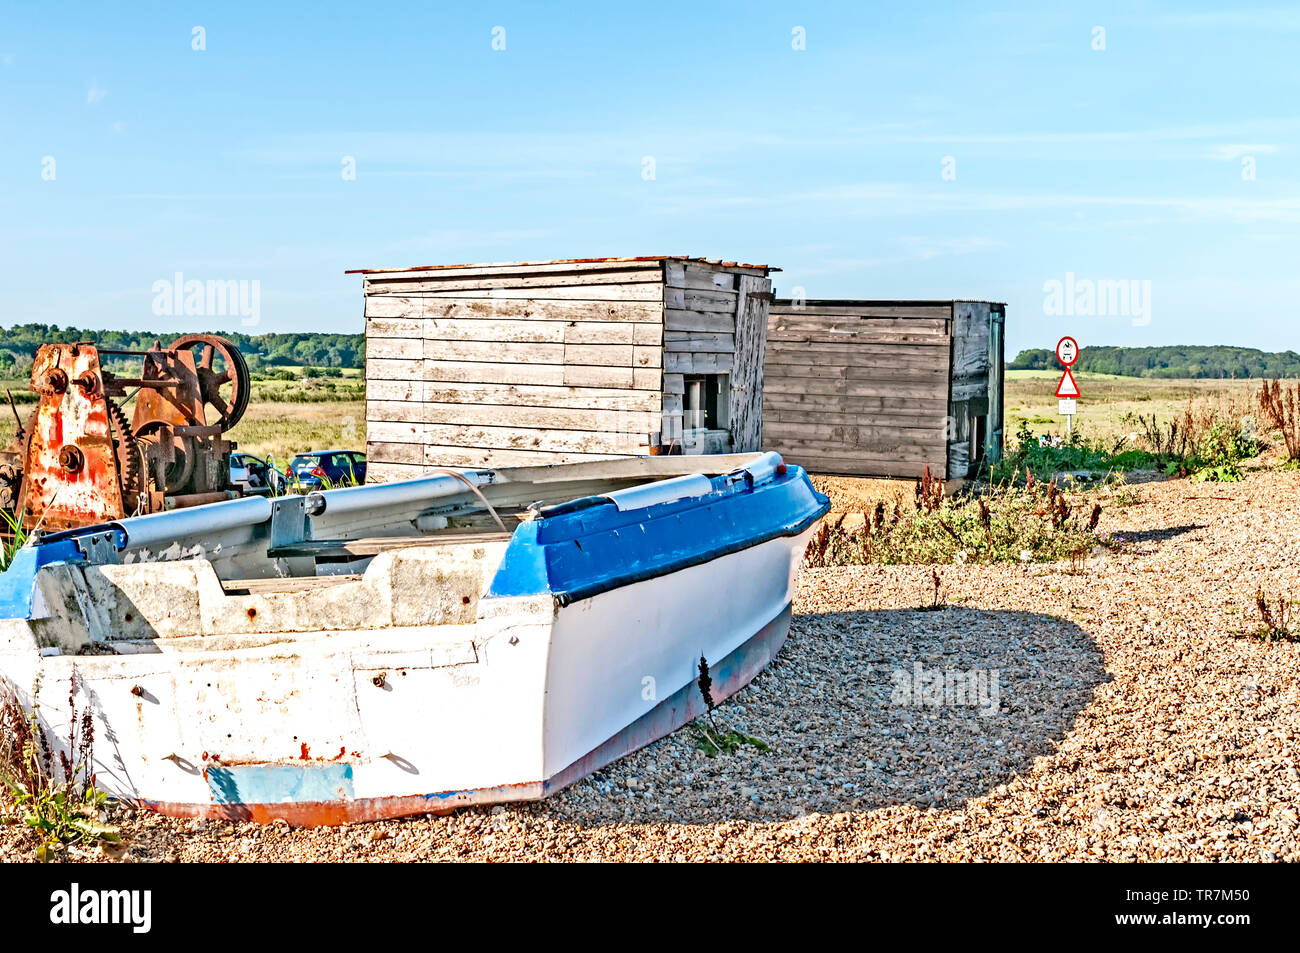 Dunwich (Suffolk, England): A boat on shore; ein altes Ruderboot am Strand Stock Photo